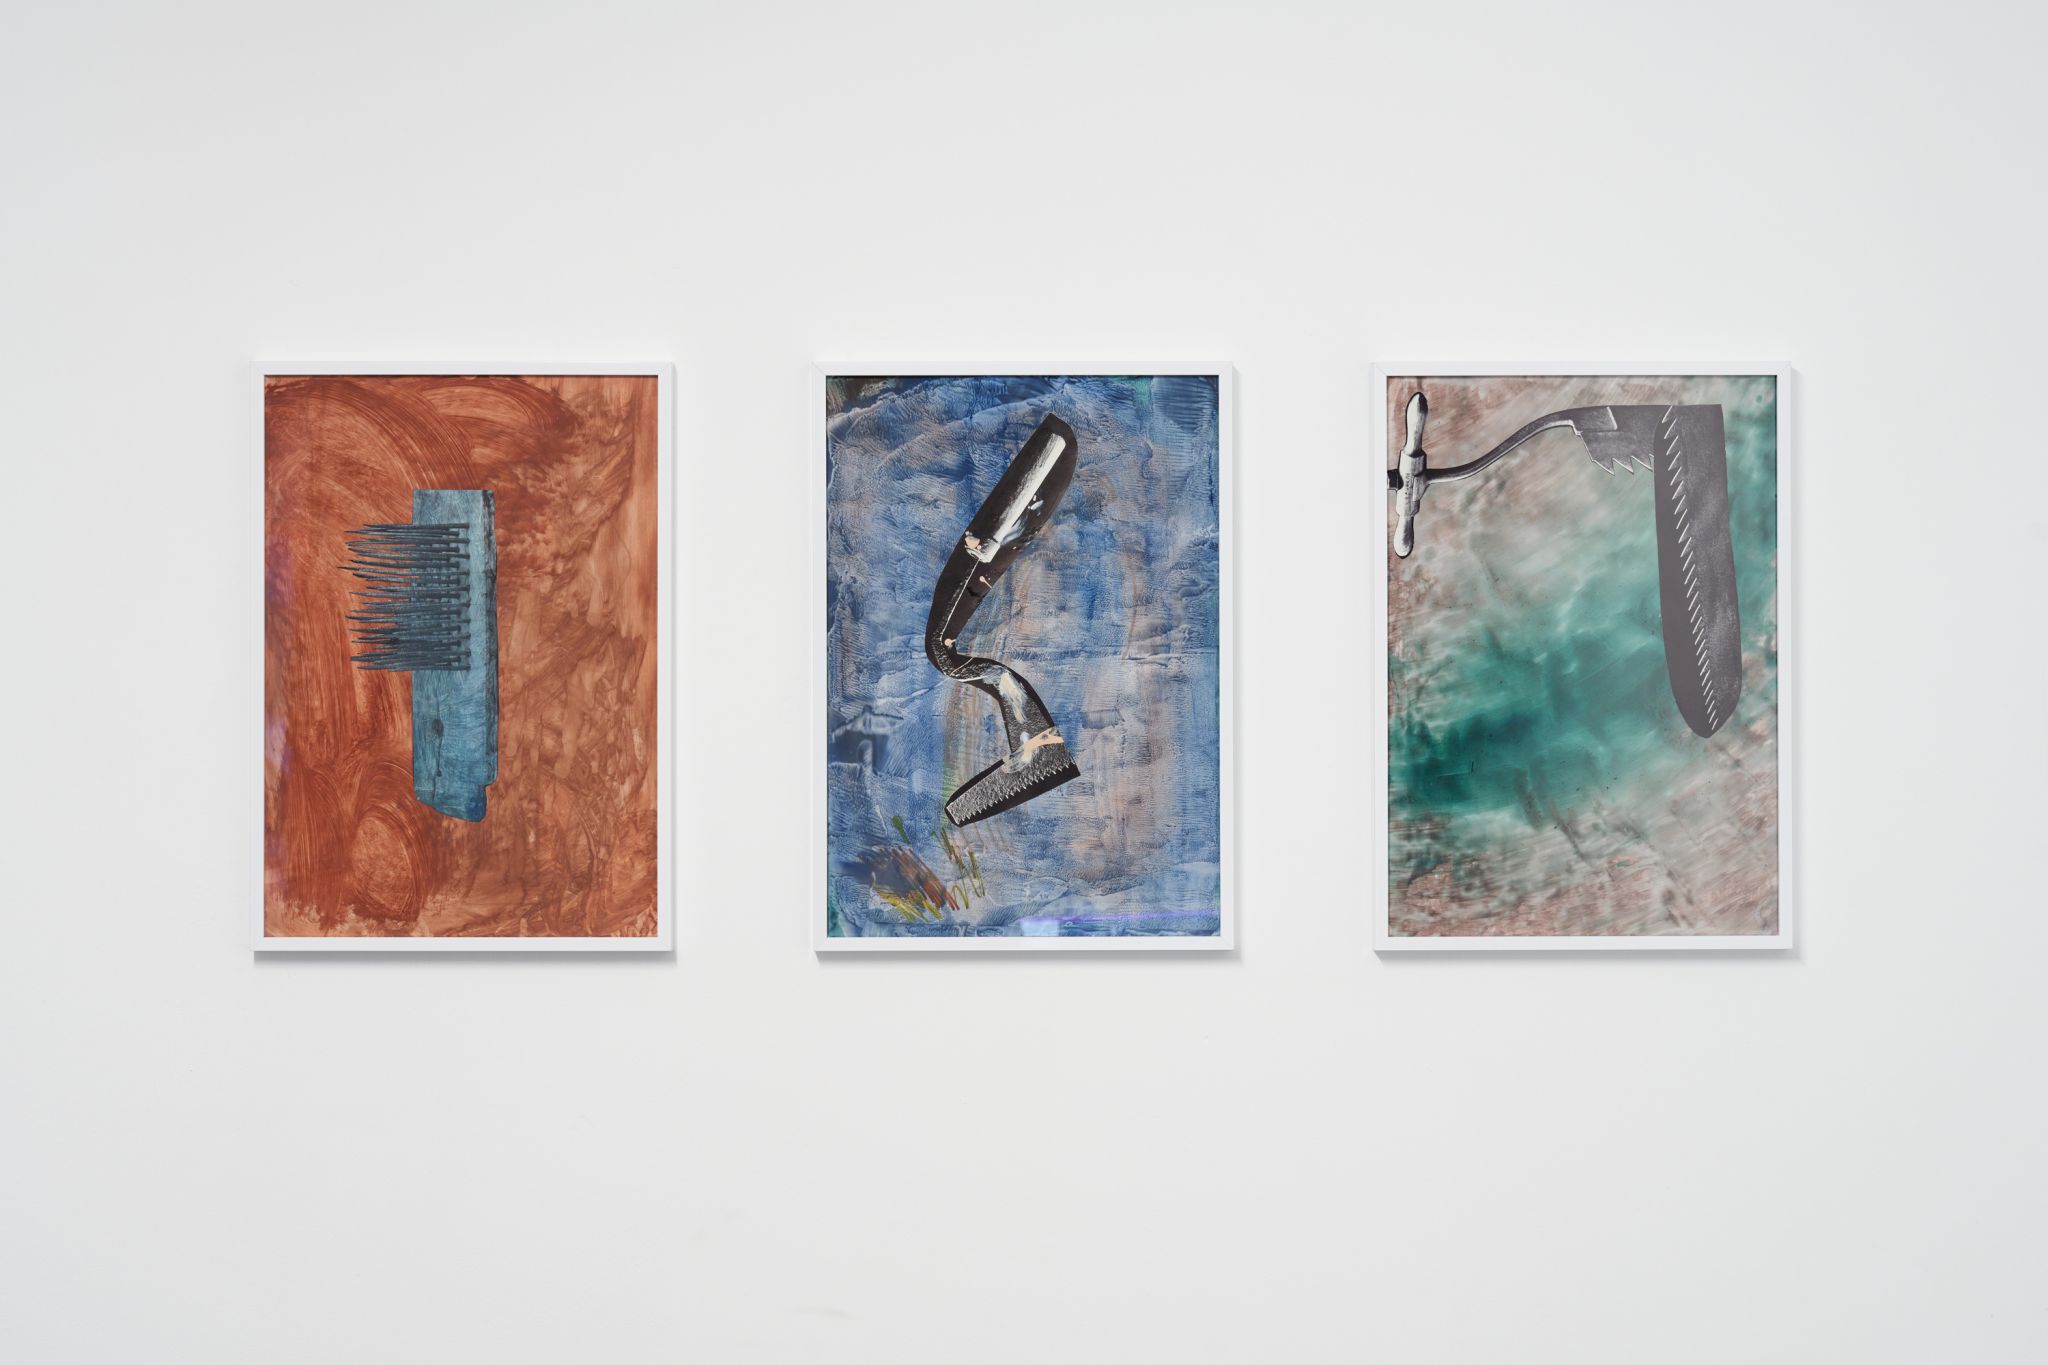 Tomaso De Luca, Early American Tools (1), (5), (4), 2023, Mixed media on paper, 30 ⁠× ⁠42 ⁠⁠cm